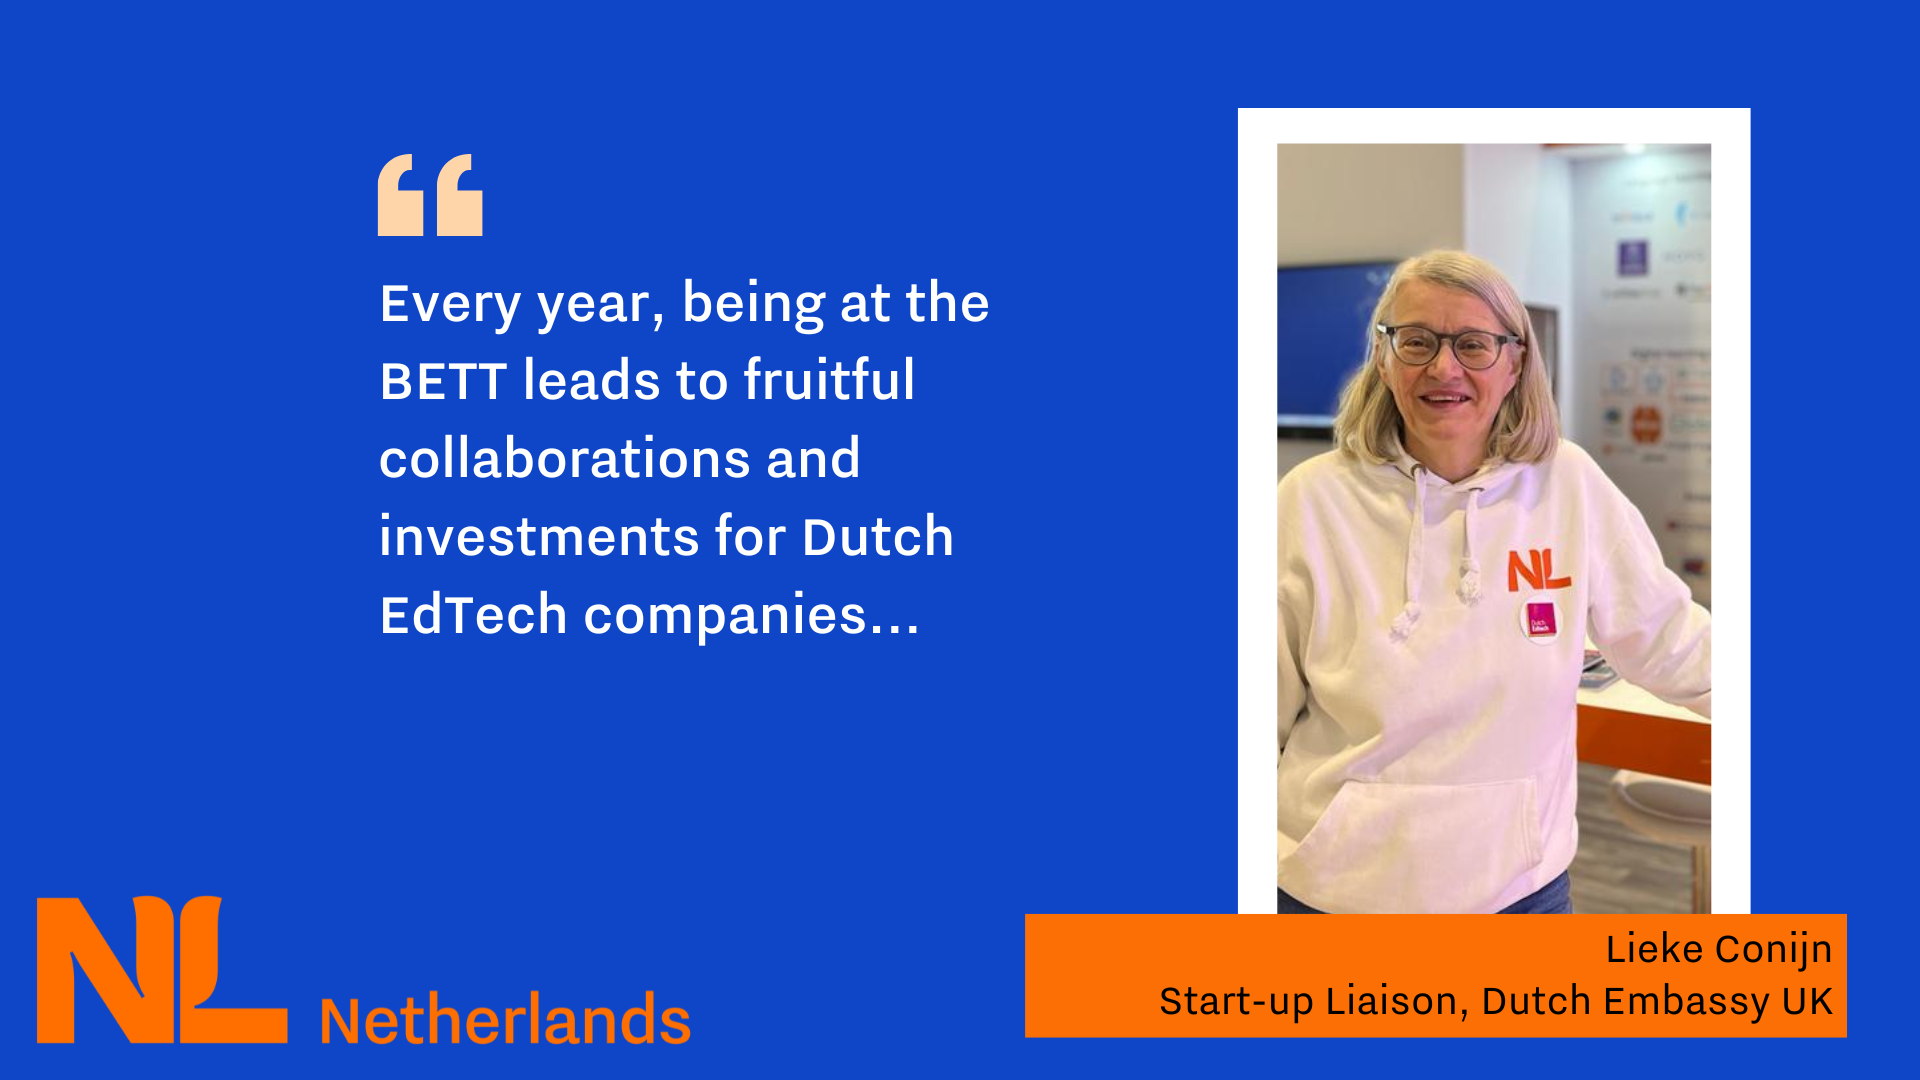 Lieke Conijn: "Every year, being at the BETT leads to fruitful collaborations and investments for Dutch EdTech companies."